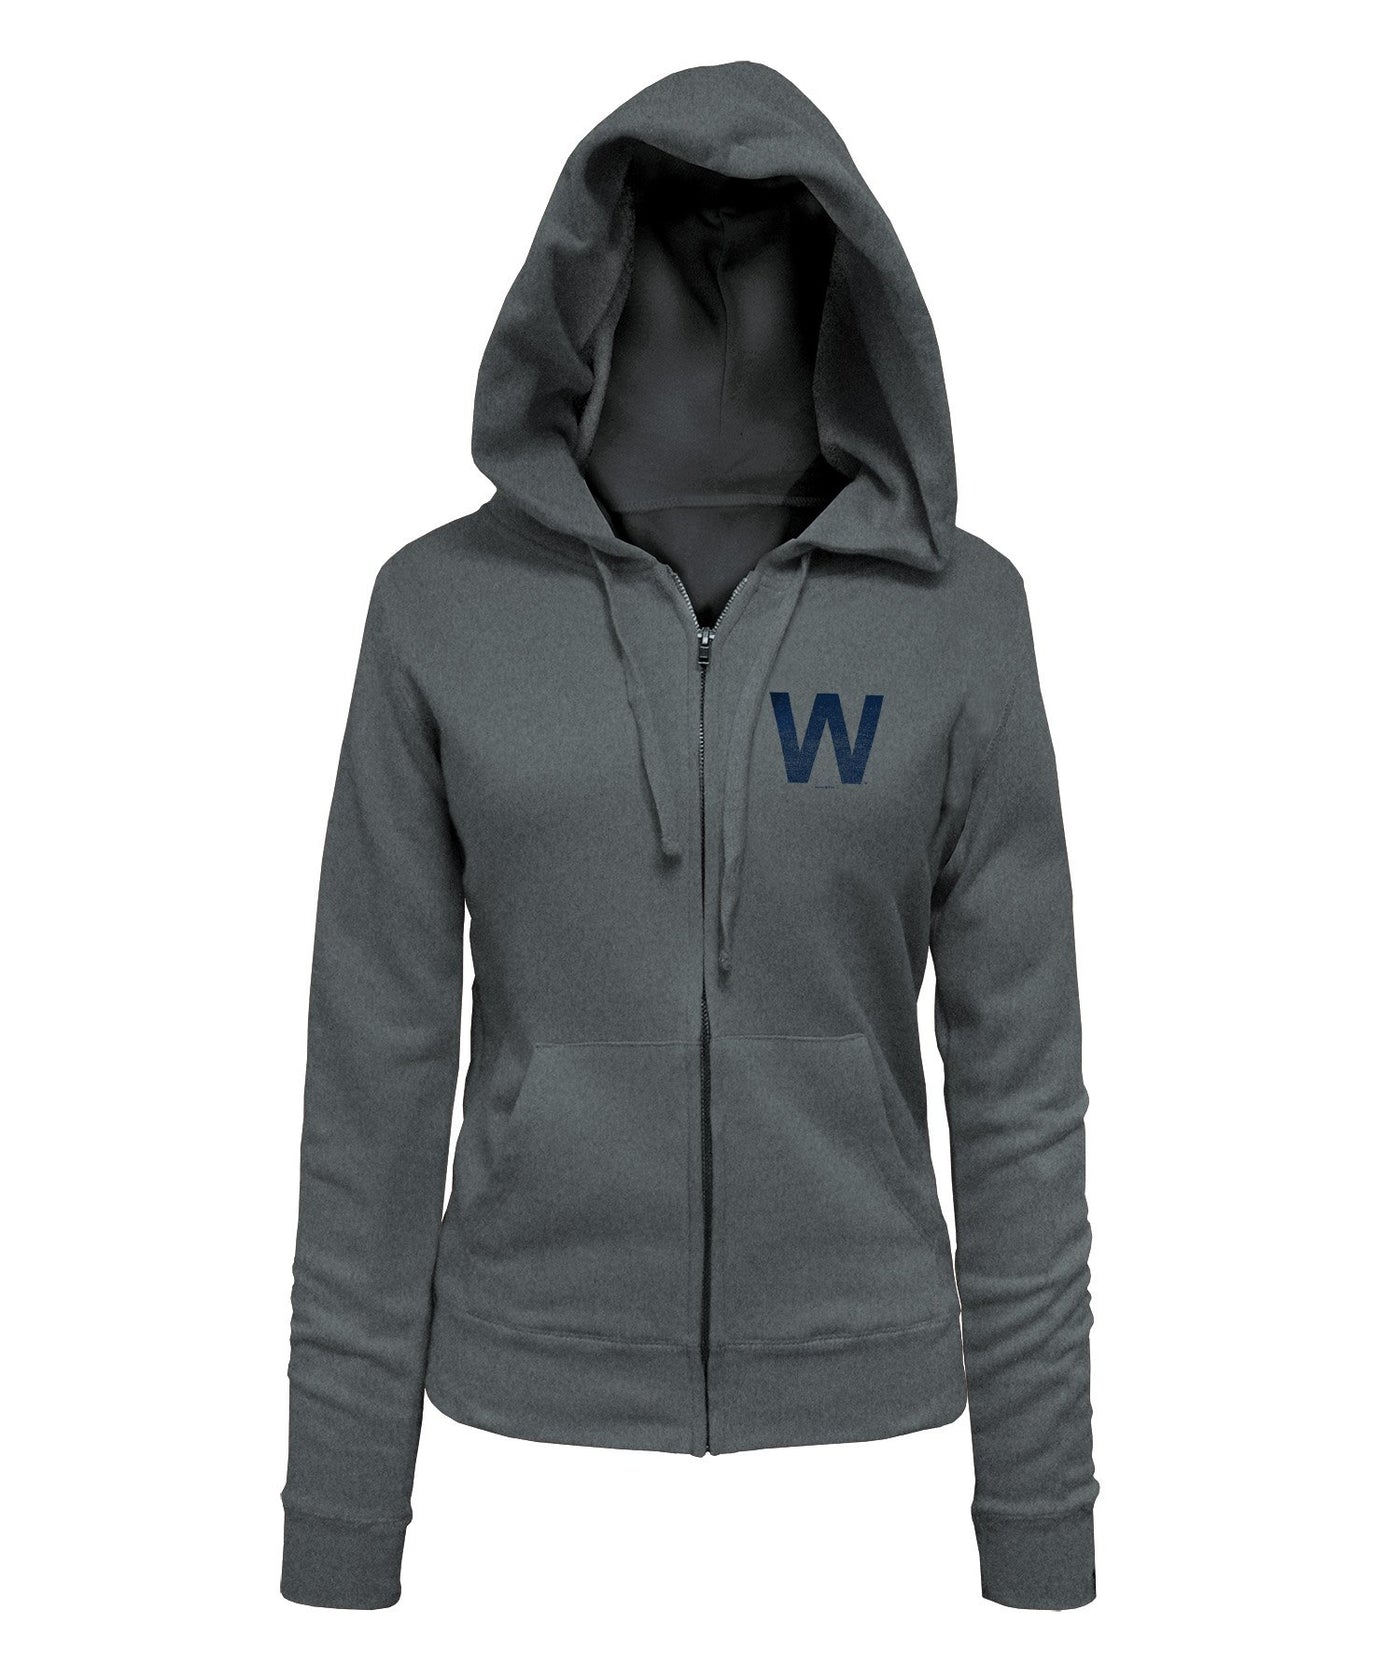 W CAPSULE COLLECTION WOMENS GRAY ZIP HOODIE - Ivy Shop